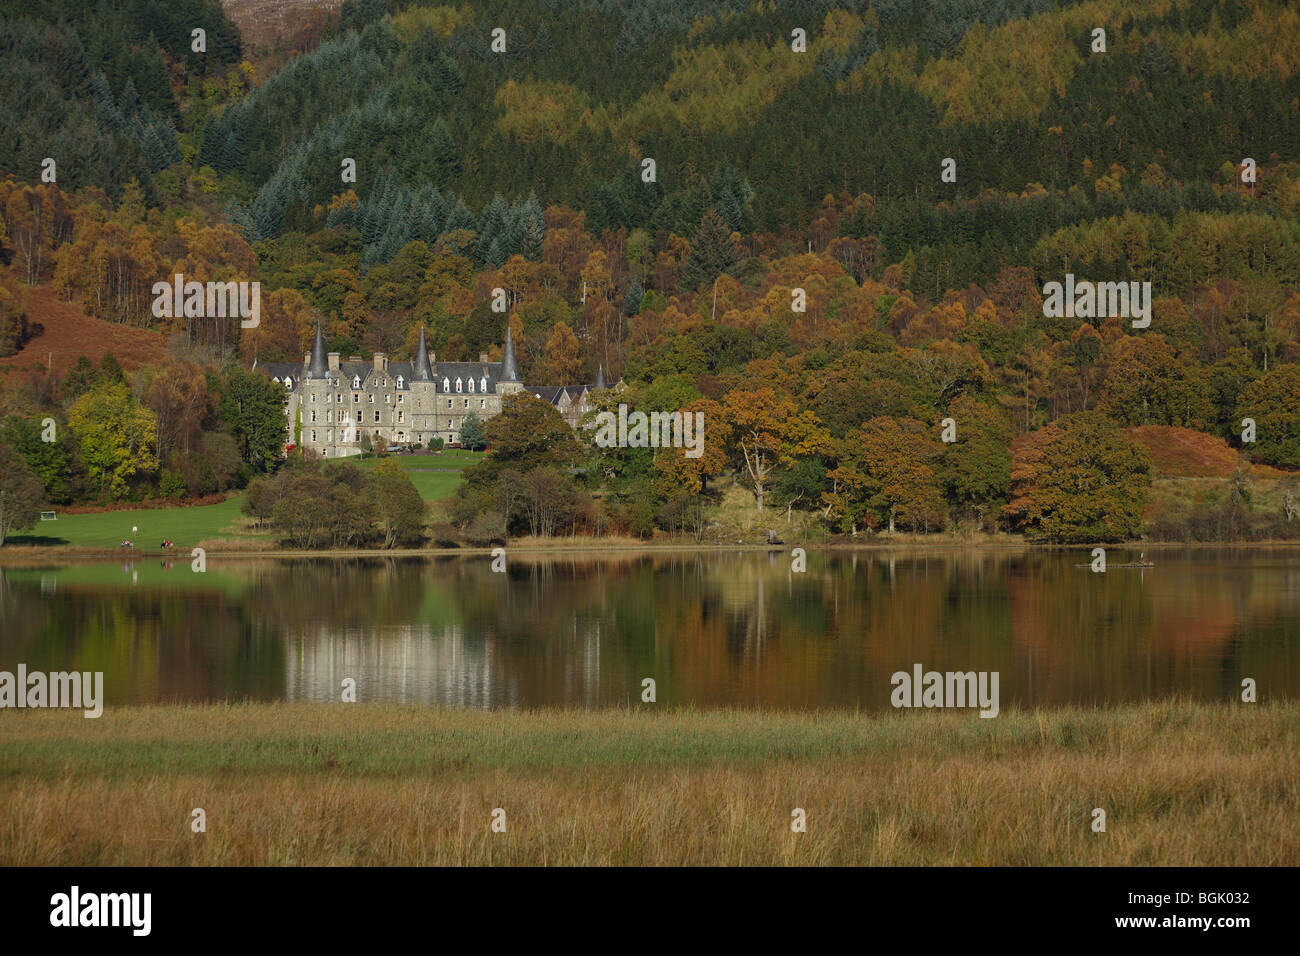 Tigh Mor Holiday Homes, formerly Trossachs Hotel, on Loch Achray in Autumn, Loch Lomond and Trossachs National Park, Stirling, Scotland, UK Stock Photo